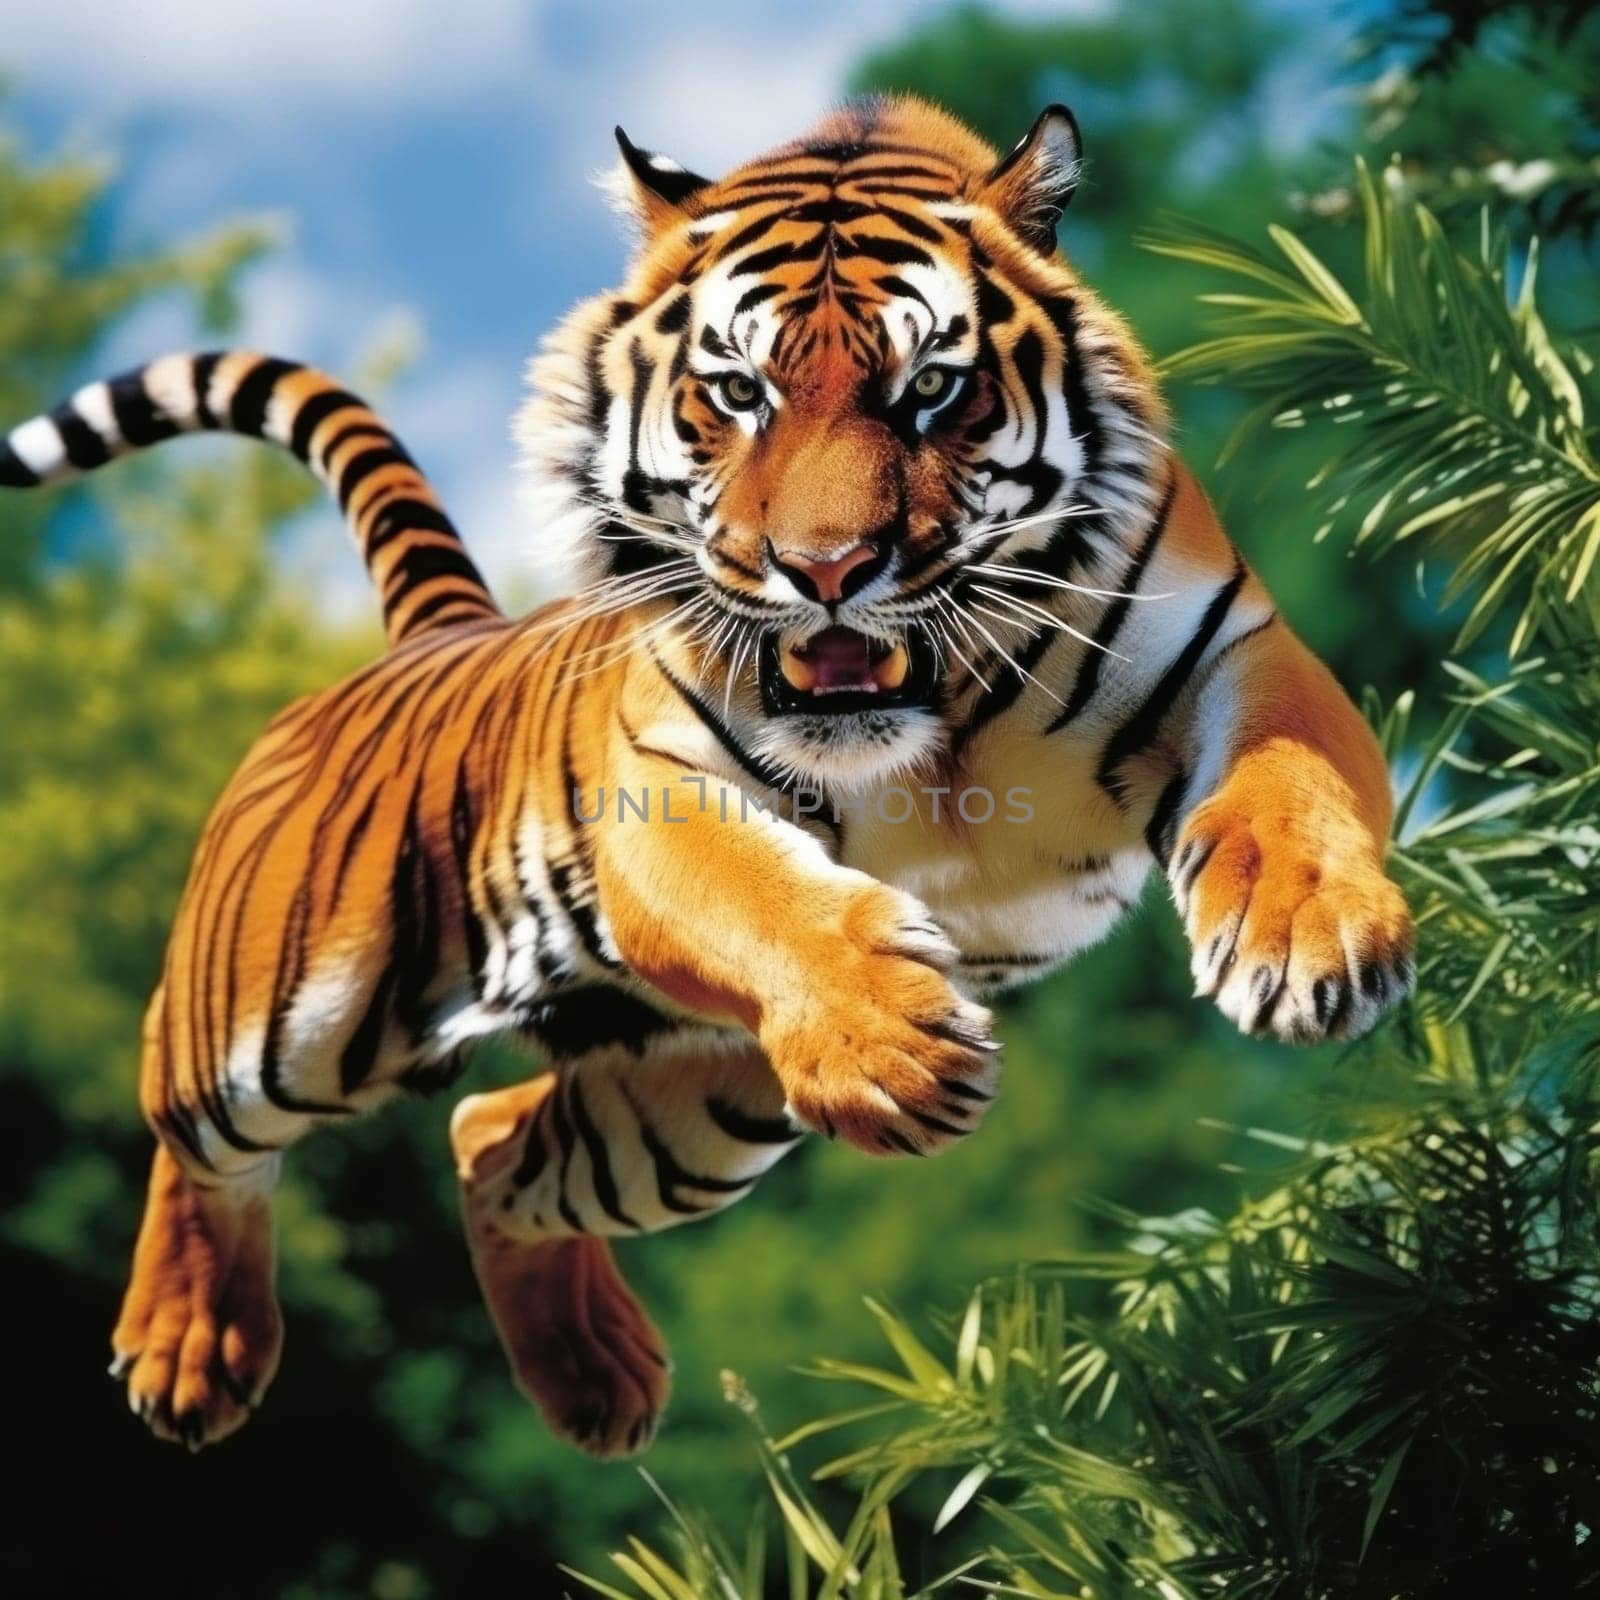 A tiger leaping from a tree branch in the air, AI by starush